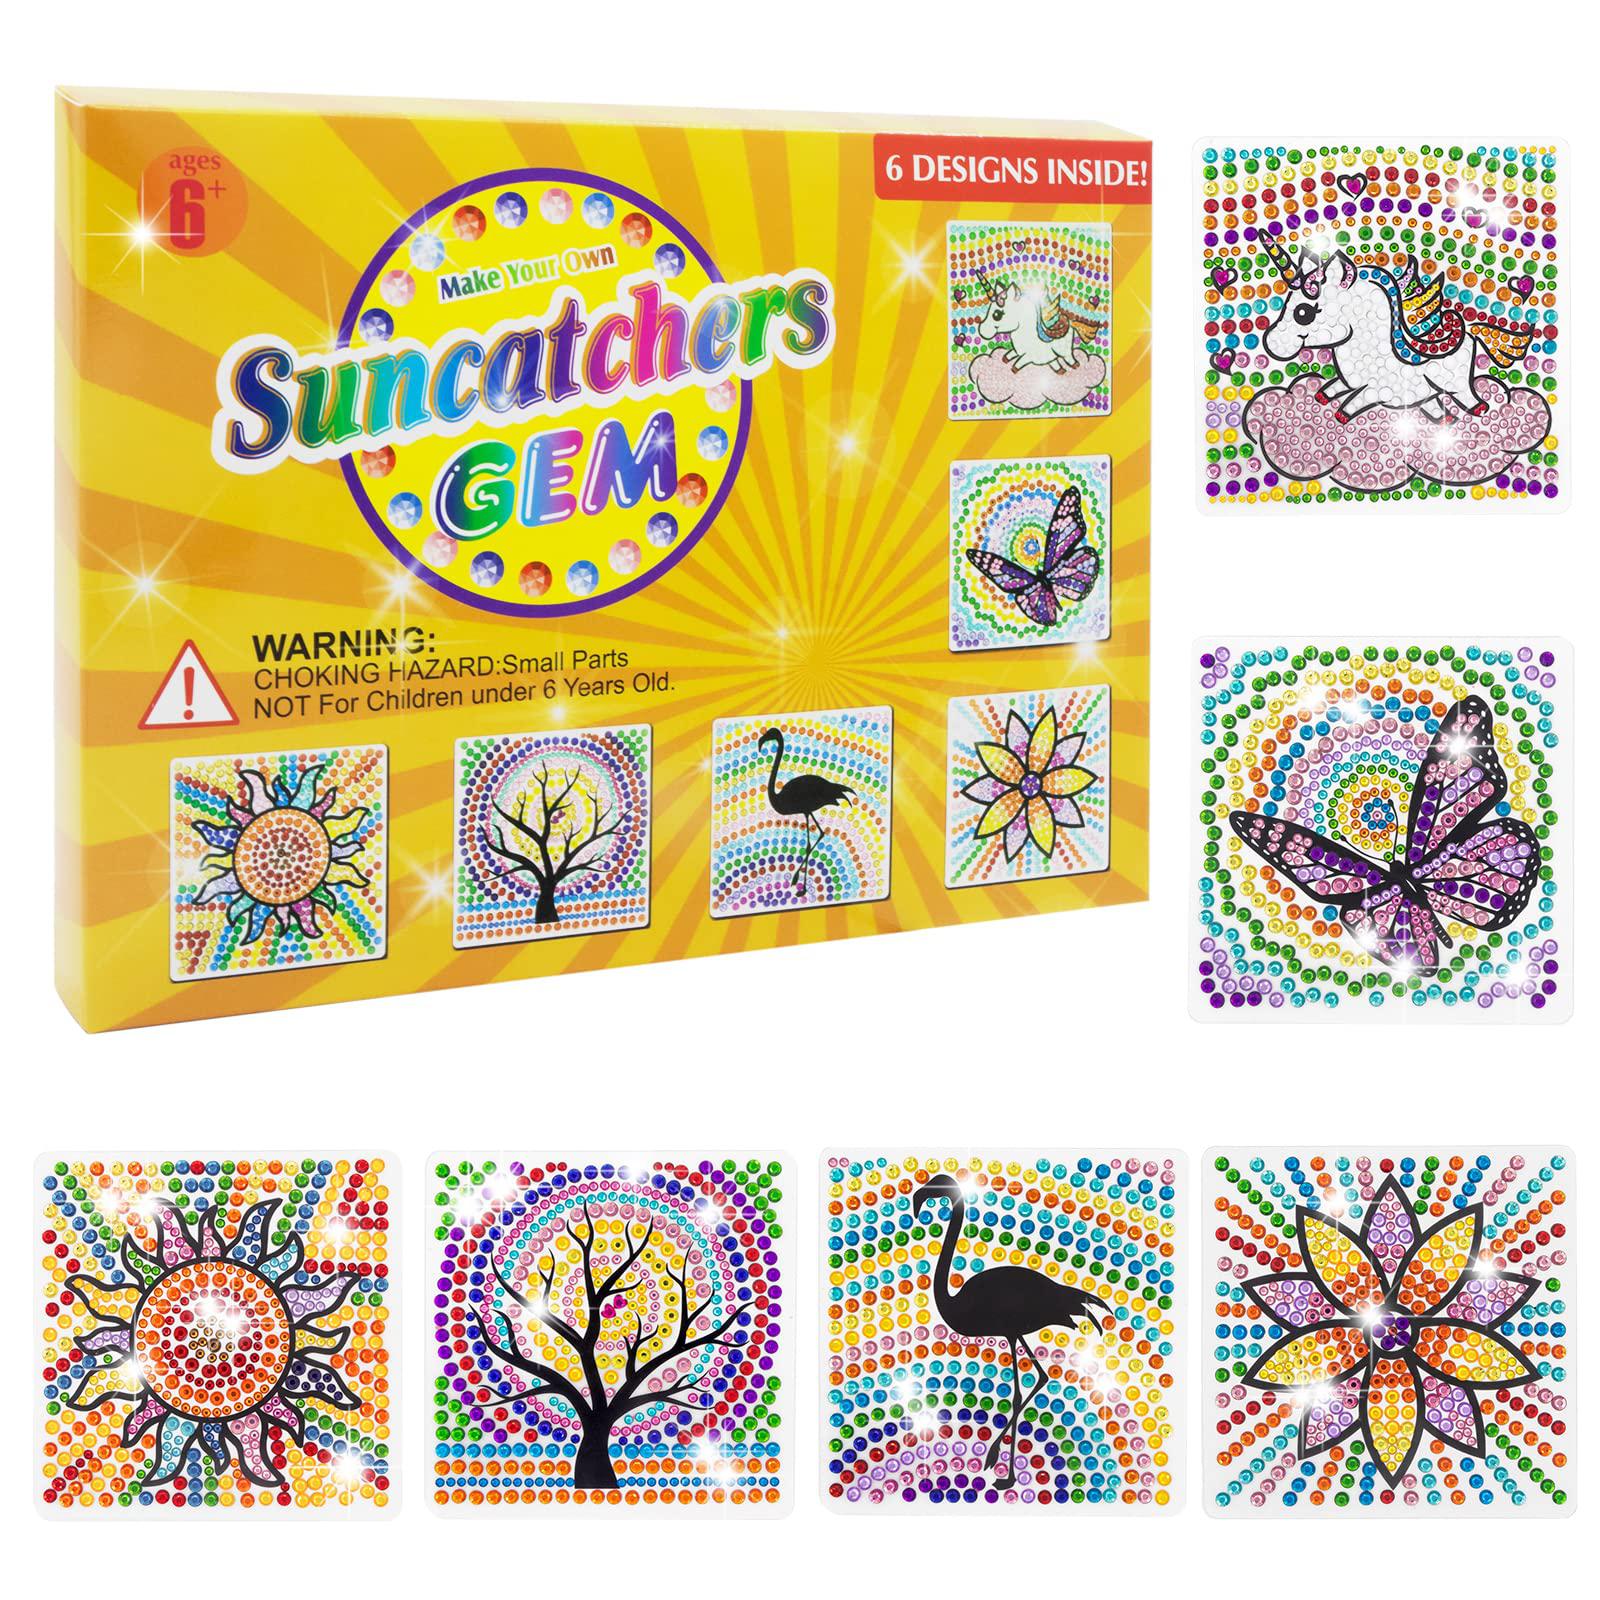 jacraftne arts and crafts for kids ages 8-12 - crafts for girls ages 8-12 -  6pcs window gem art suncatcher kits - birthday gifts for 4